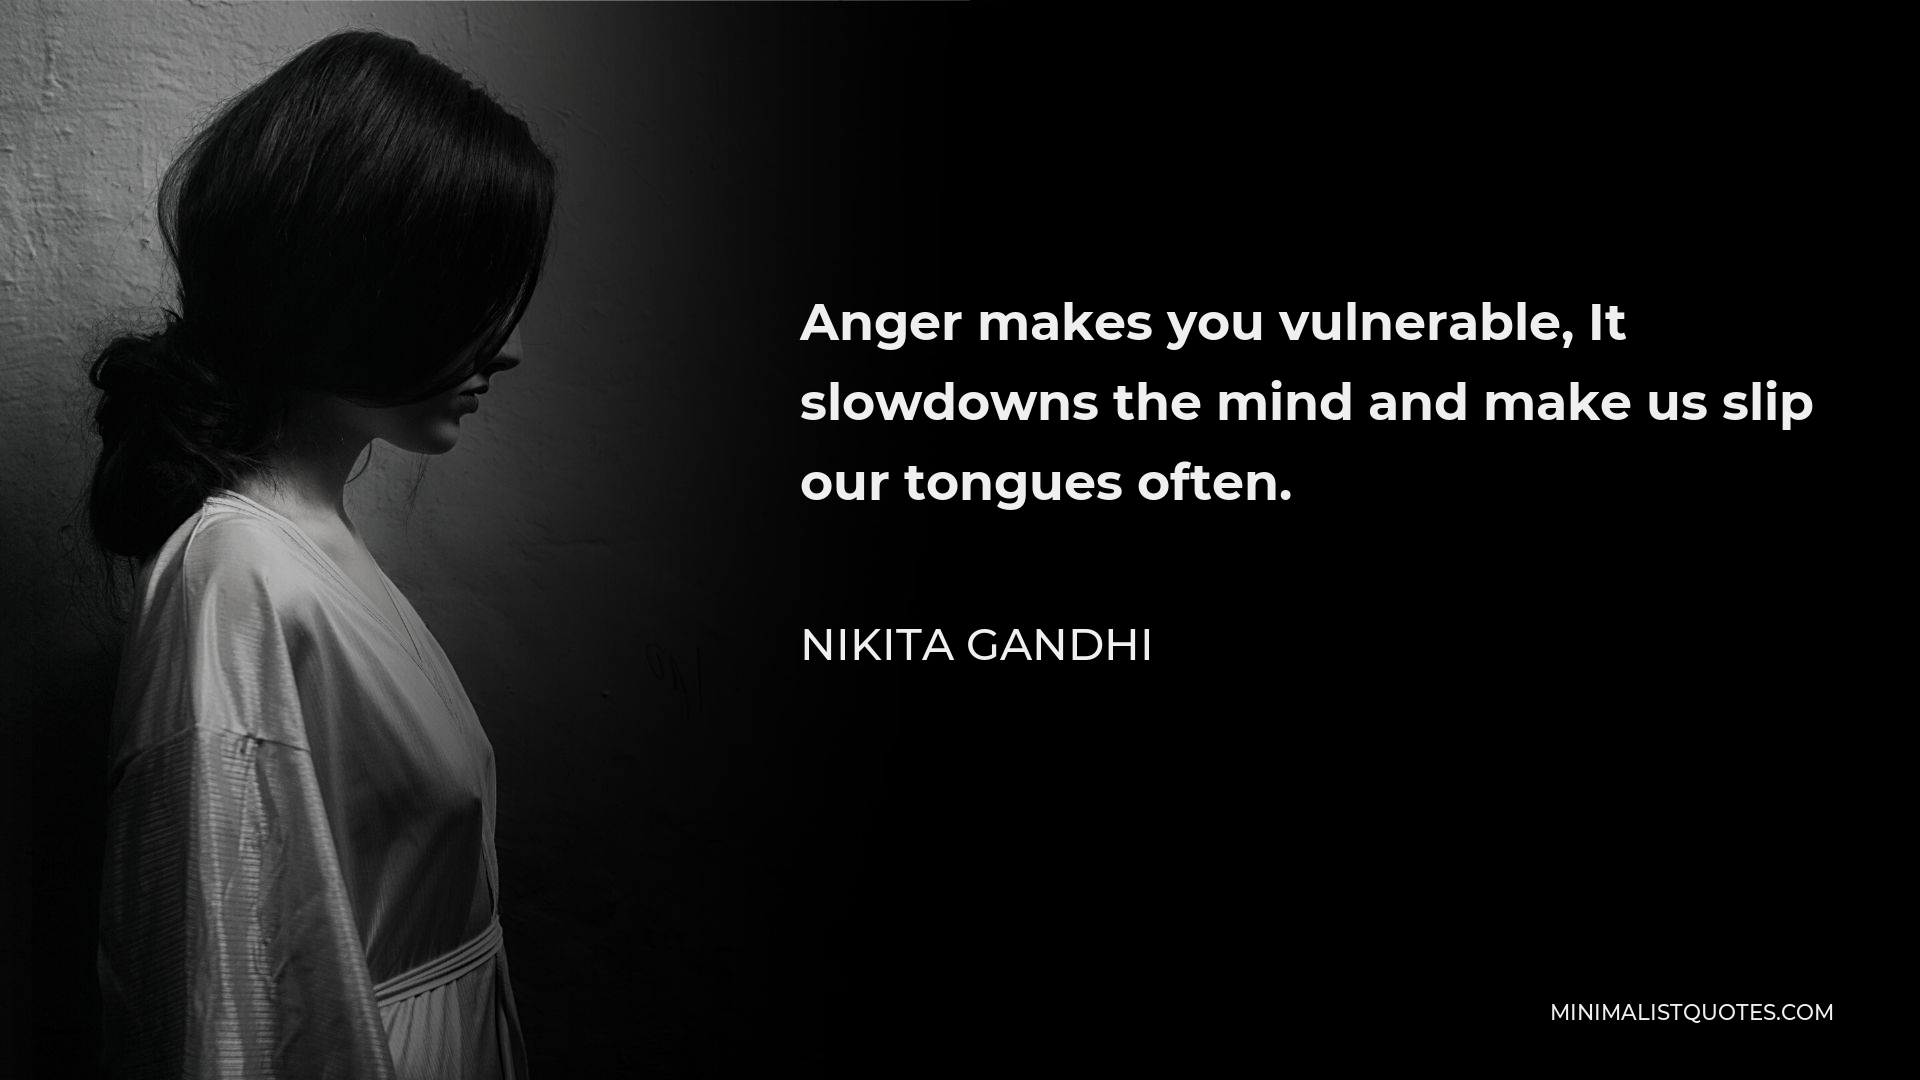 Nikita Gandhi Quote - Anger makes you vulnerable, It slowdowns the mind and make us slip our tongues often.